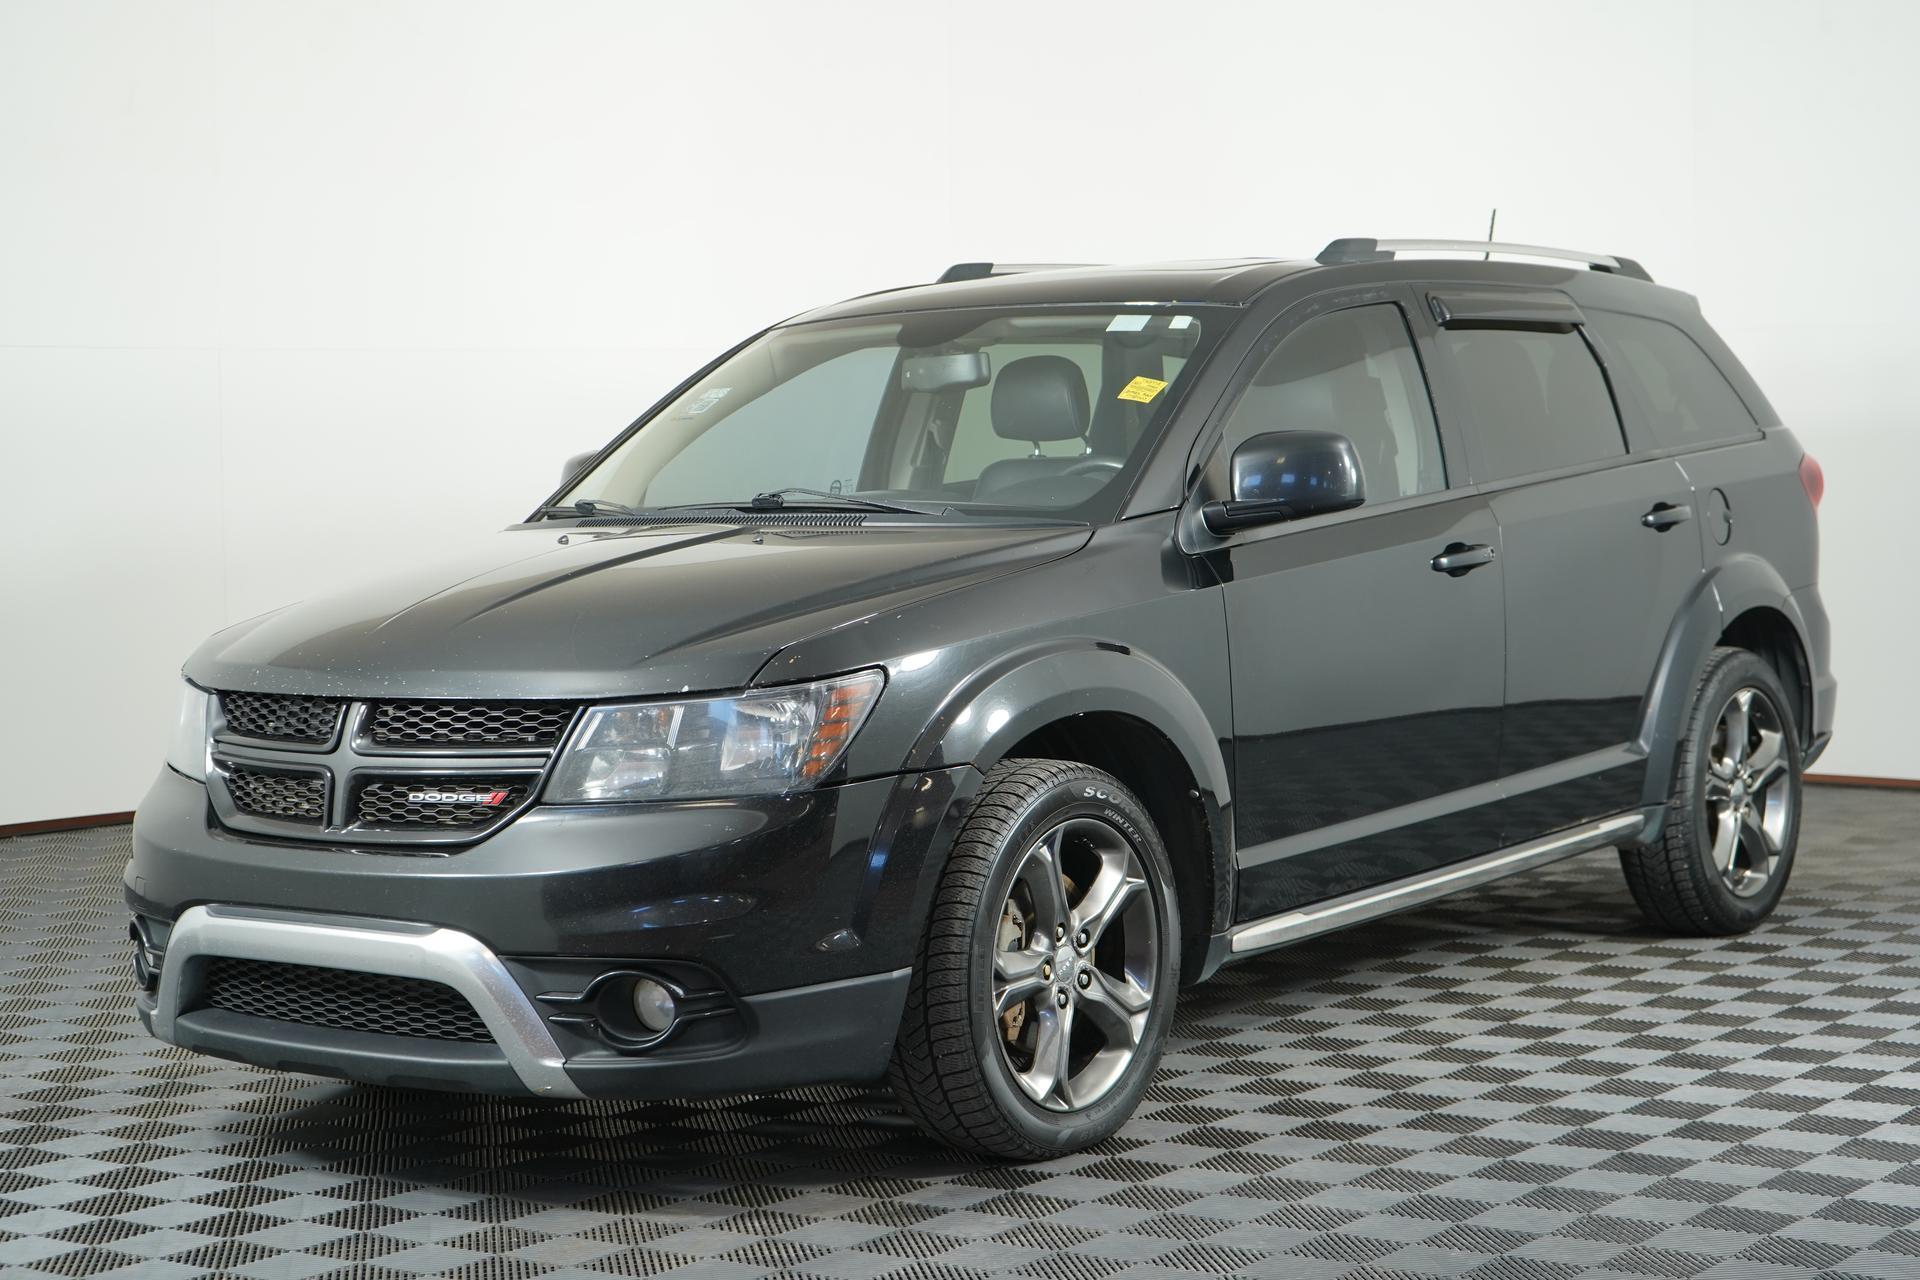 2015 Dodge Journey CROSSROAD   ,Well Serviced